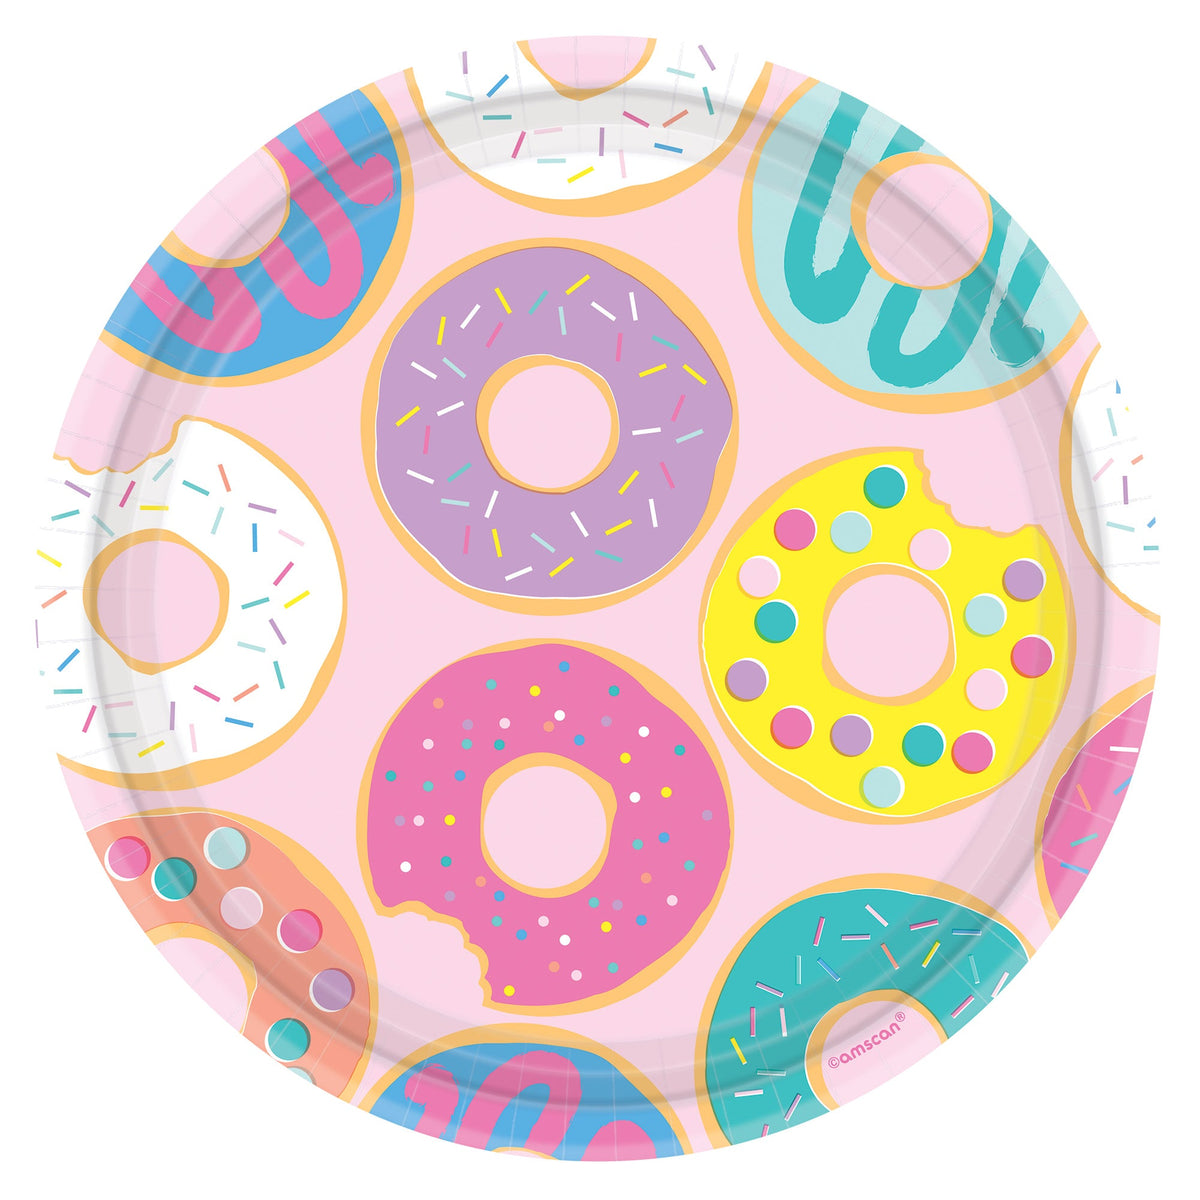 Donut Party 9" Round Plates Package of 8